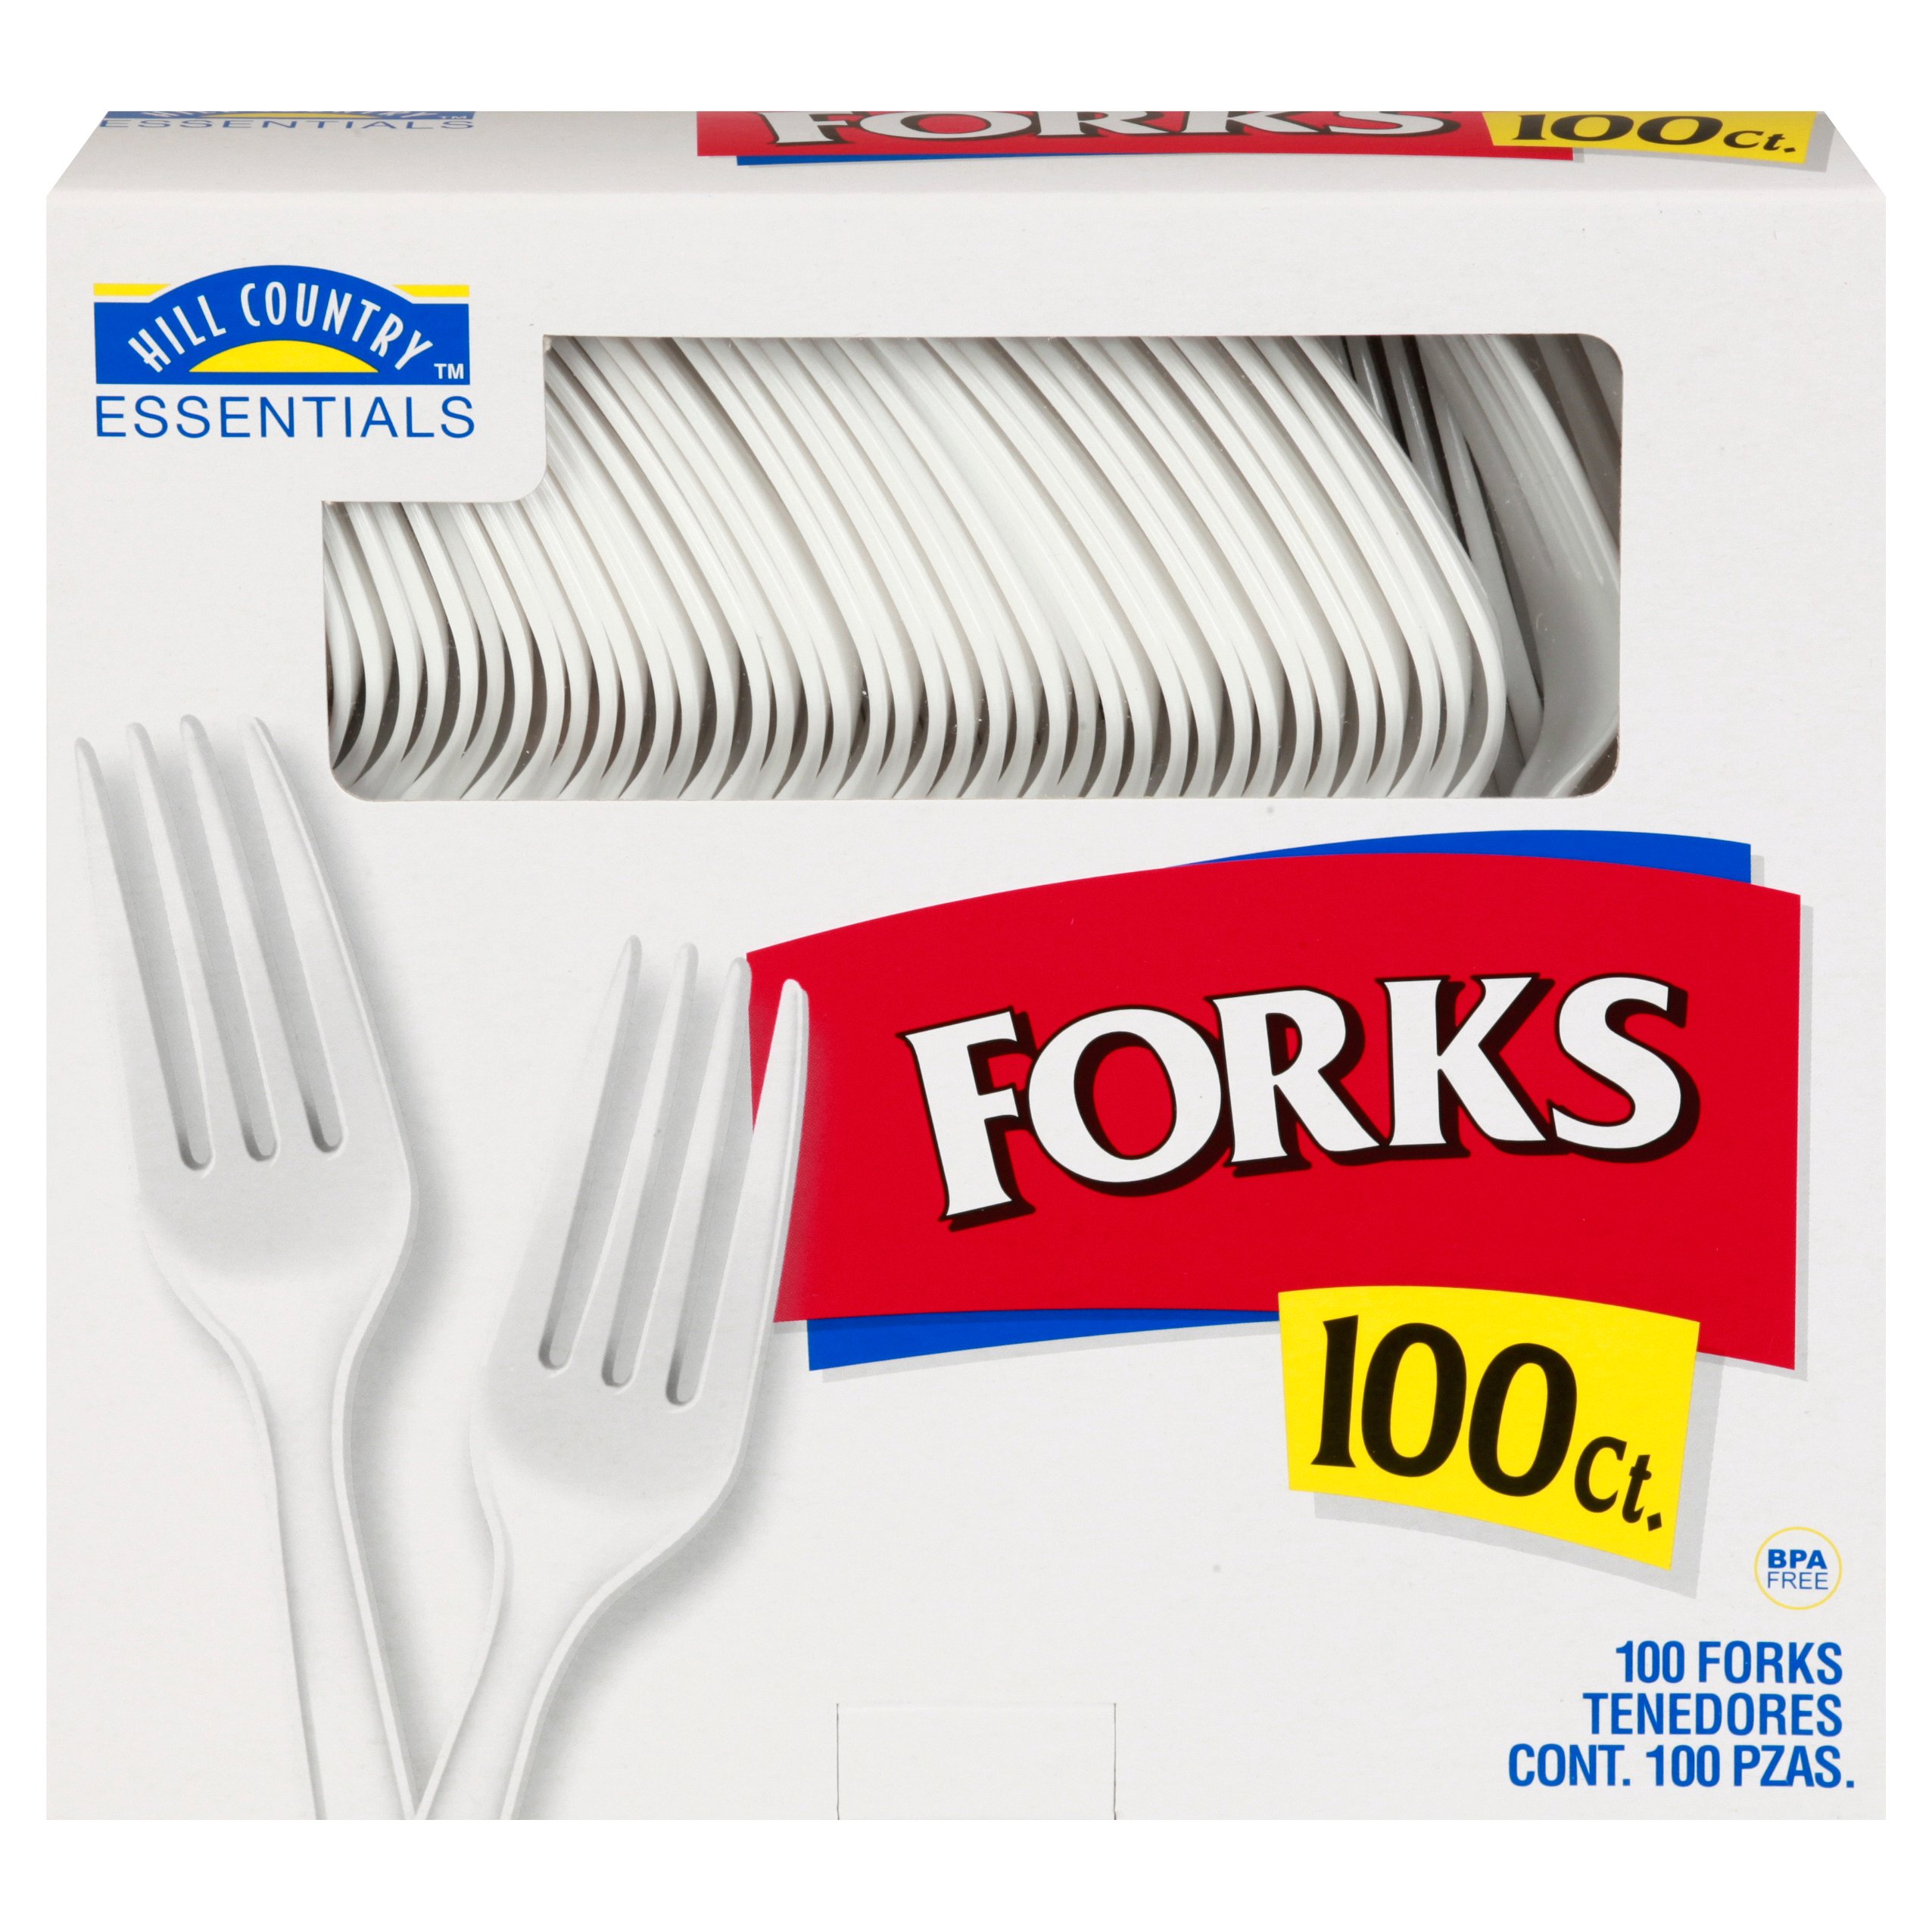 Hill Country Essentials Plastic Forks - White - Shop Flatware